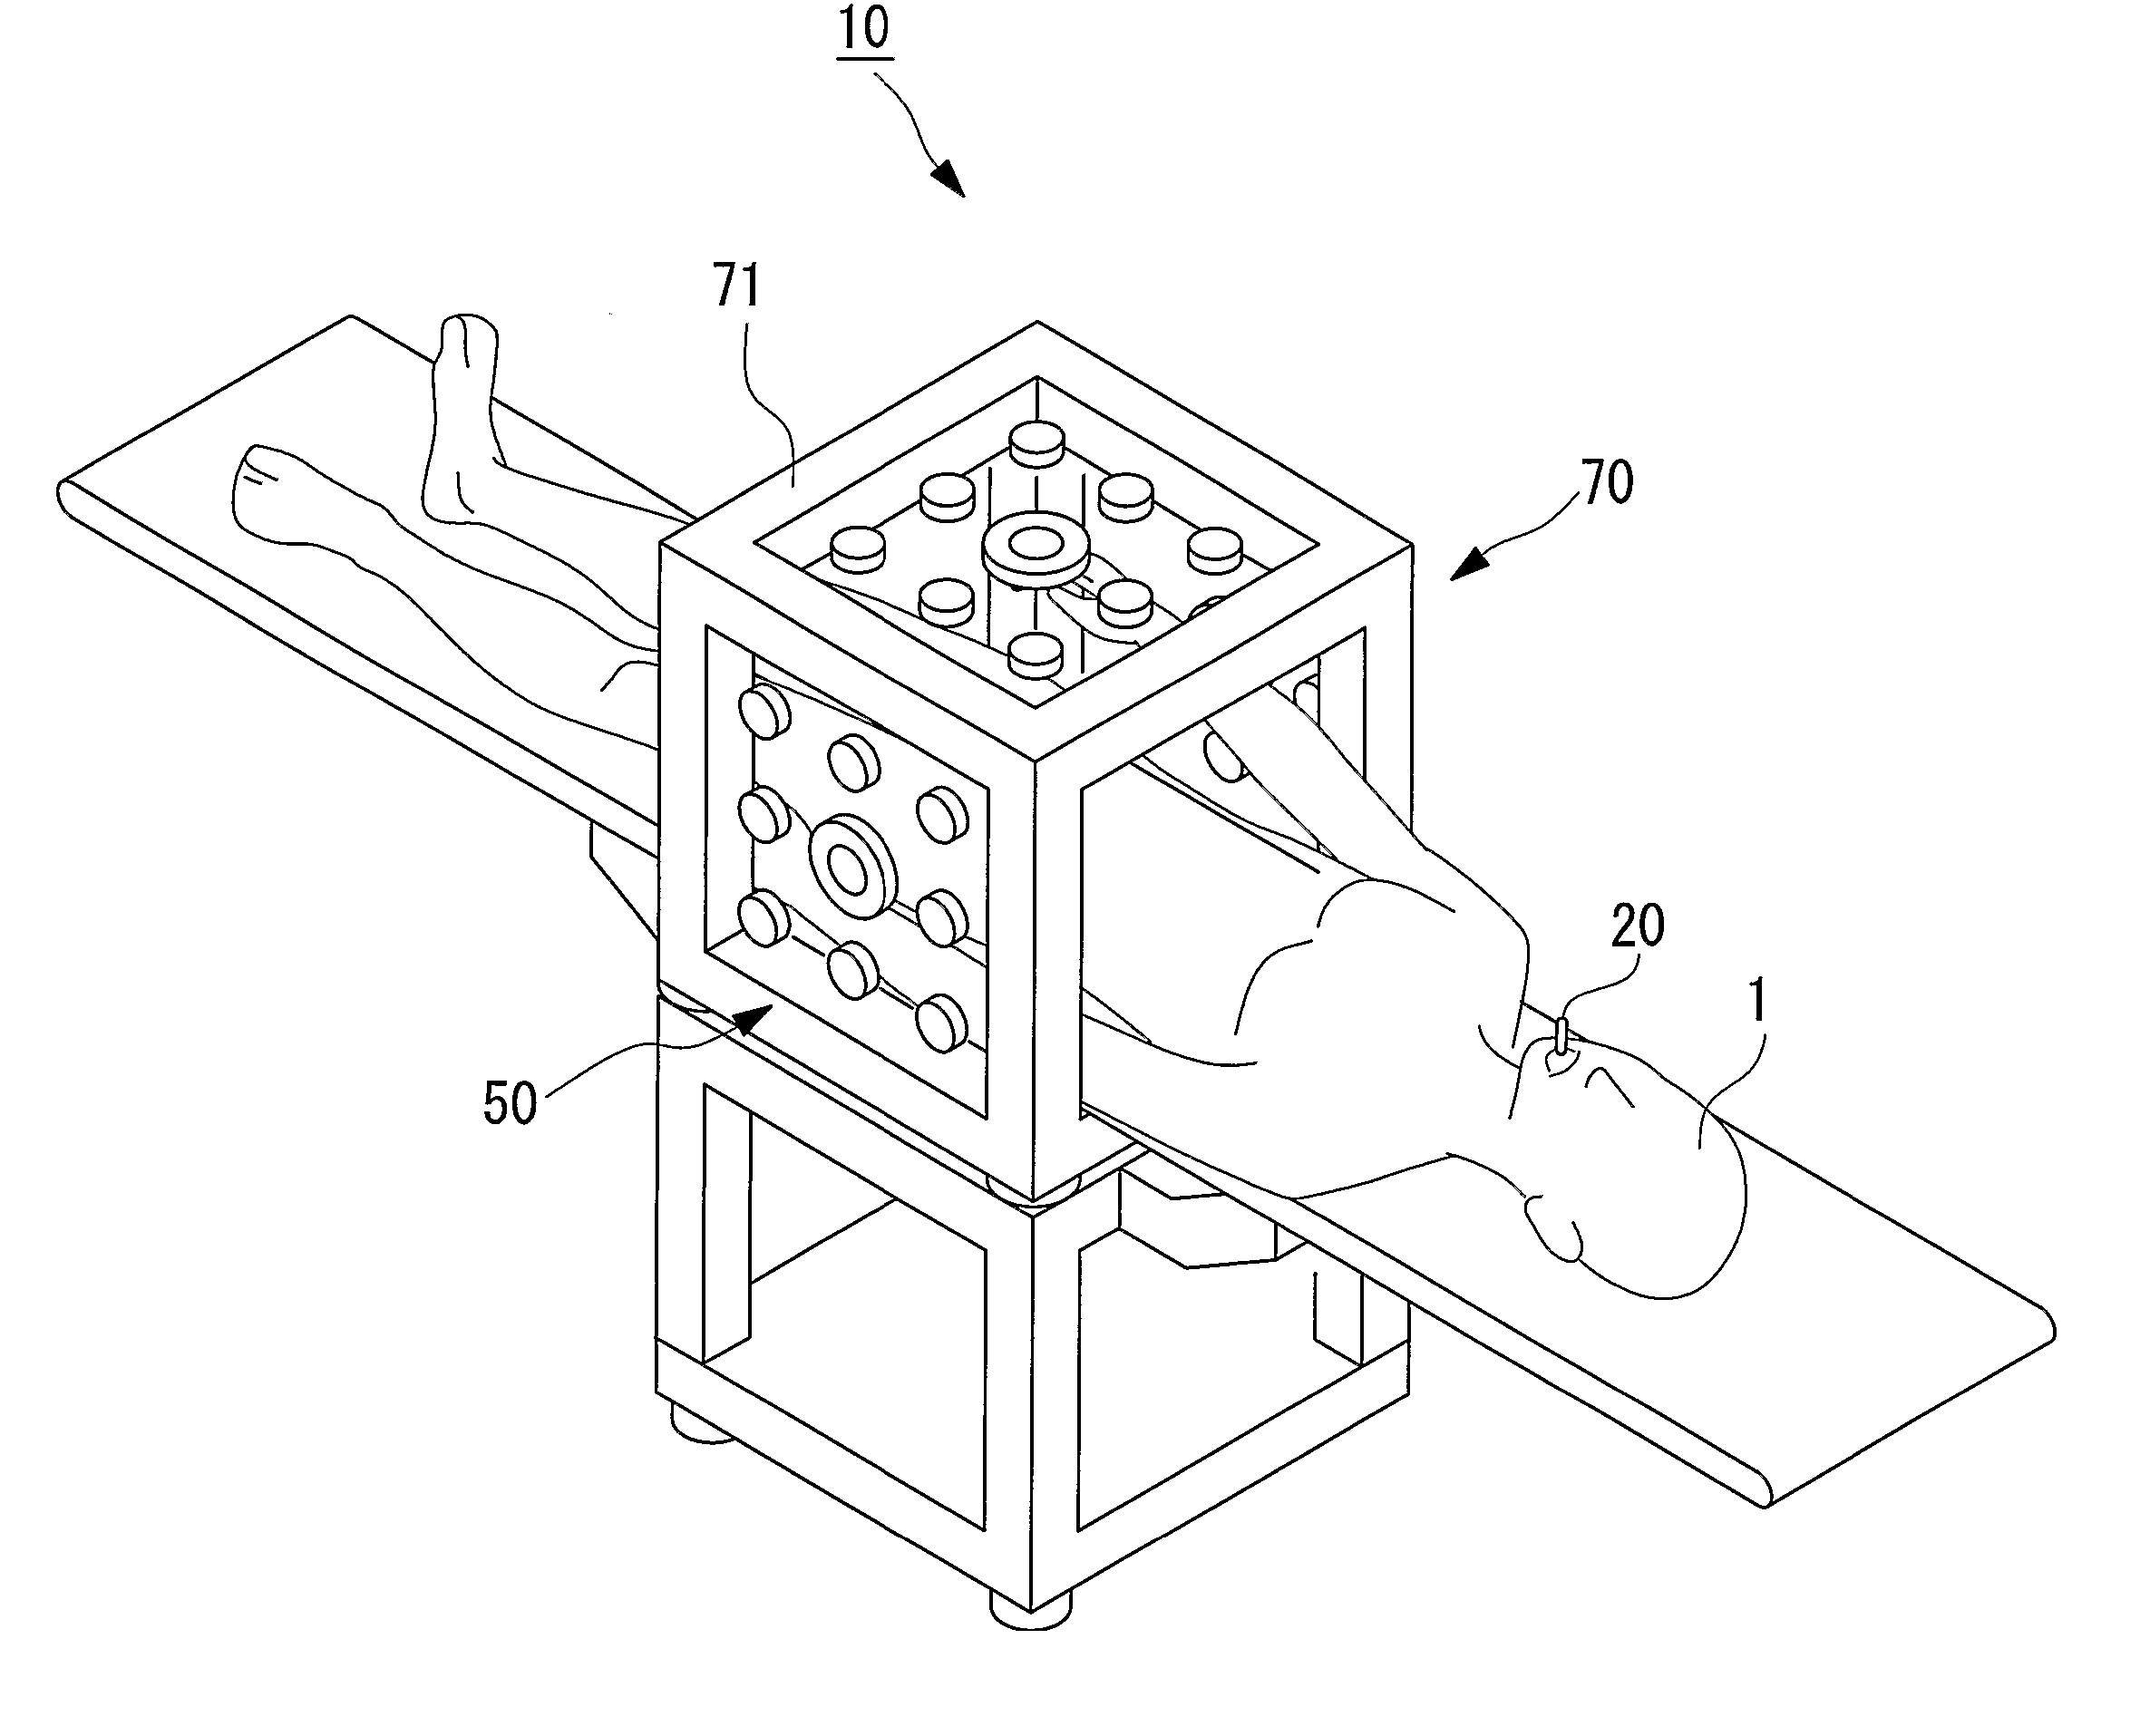 Position Detection System, Guidance System, Position Detection Method, Medical Device, and Medical Magnetic-Induction and Position-Detection System